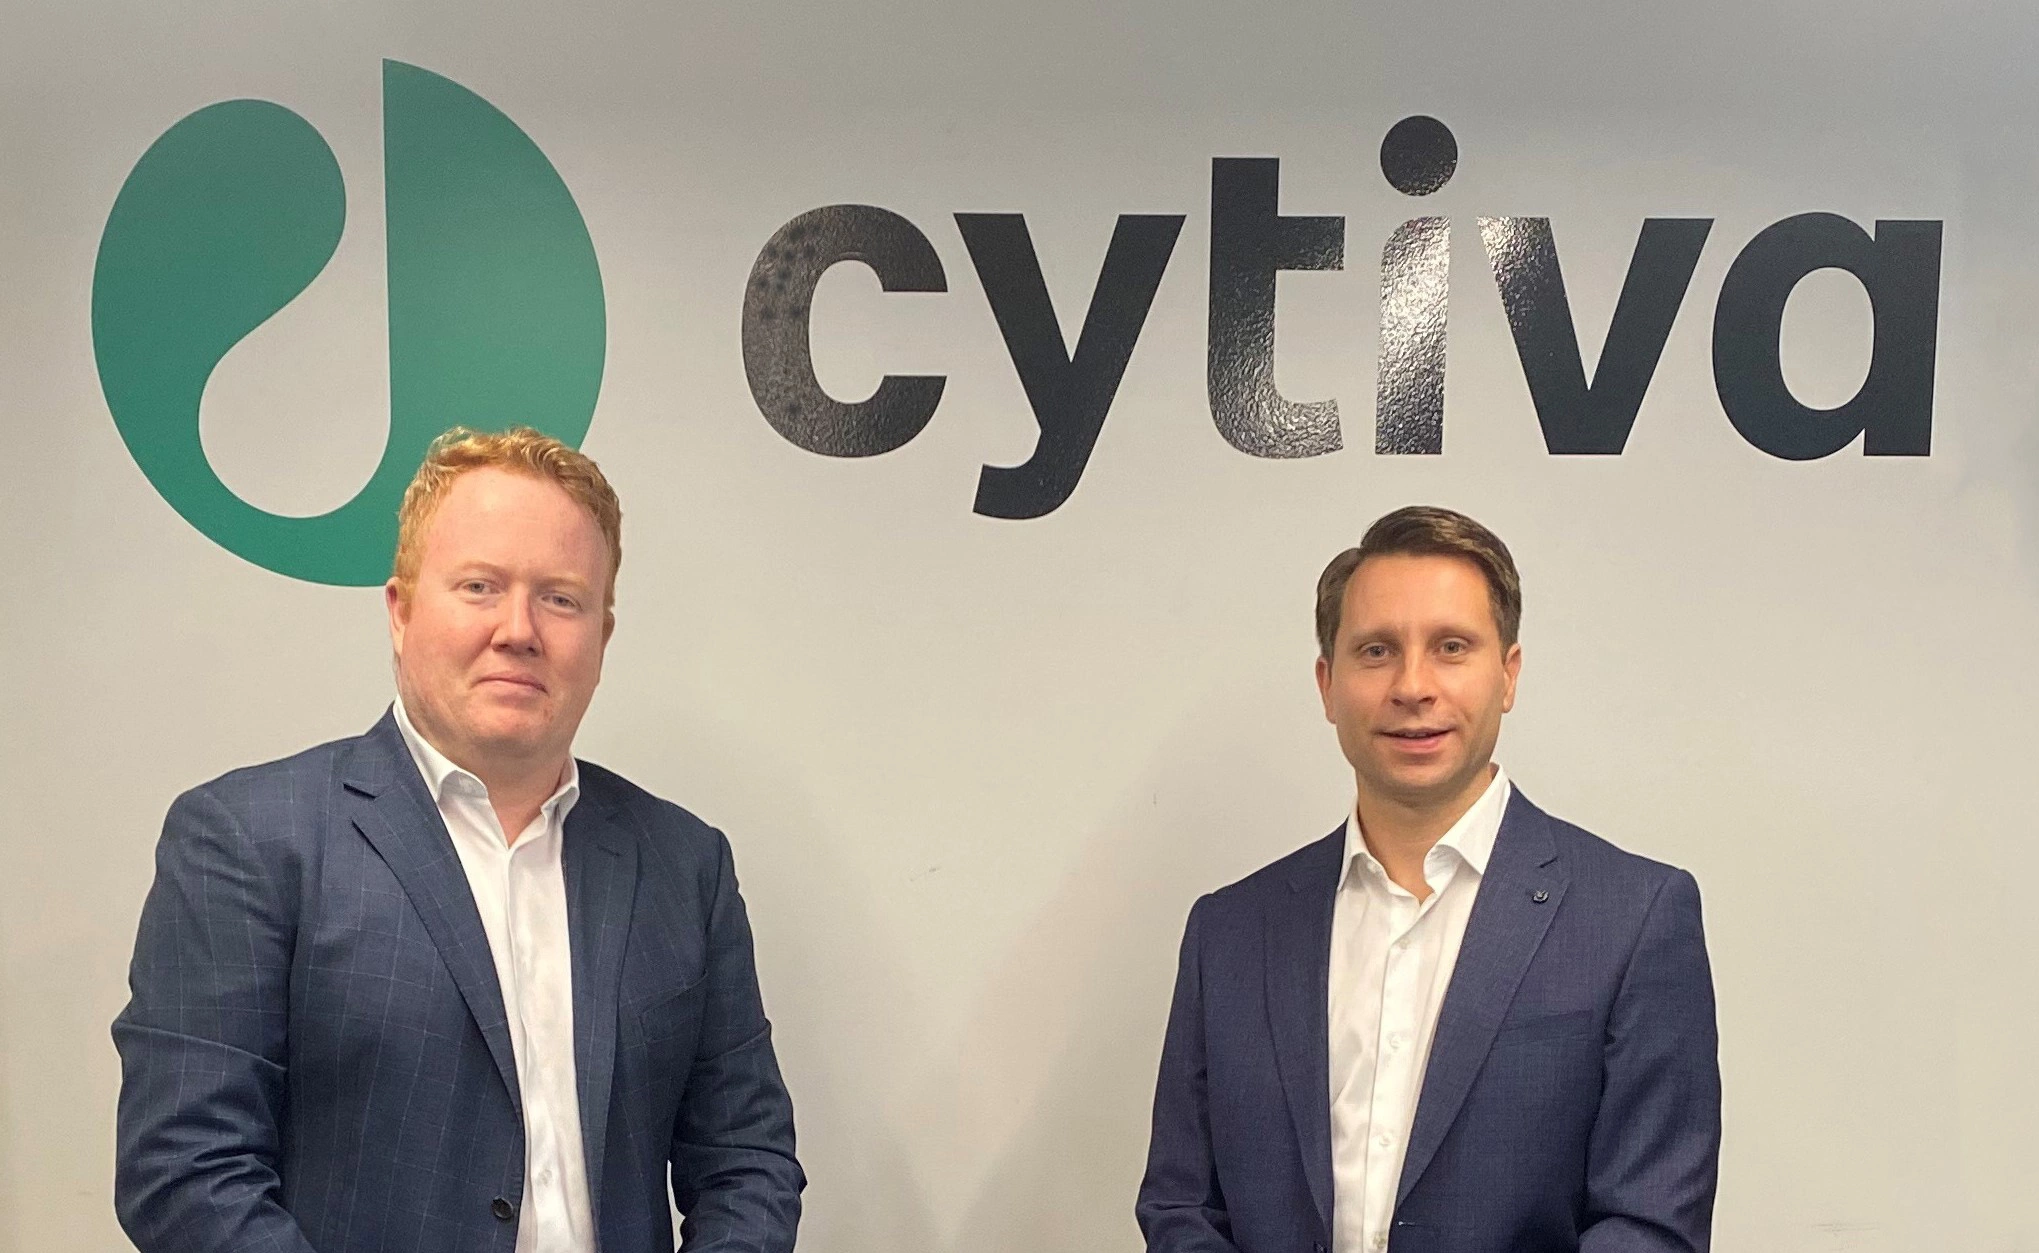 AcuraBio selects Cytiva’s latest two-step purification protocol to offer a productive plasmid DNA service to its customers globally to alleviate supply constraints for mRNA and cell & gene therapies